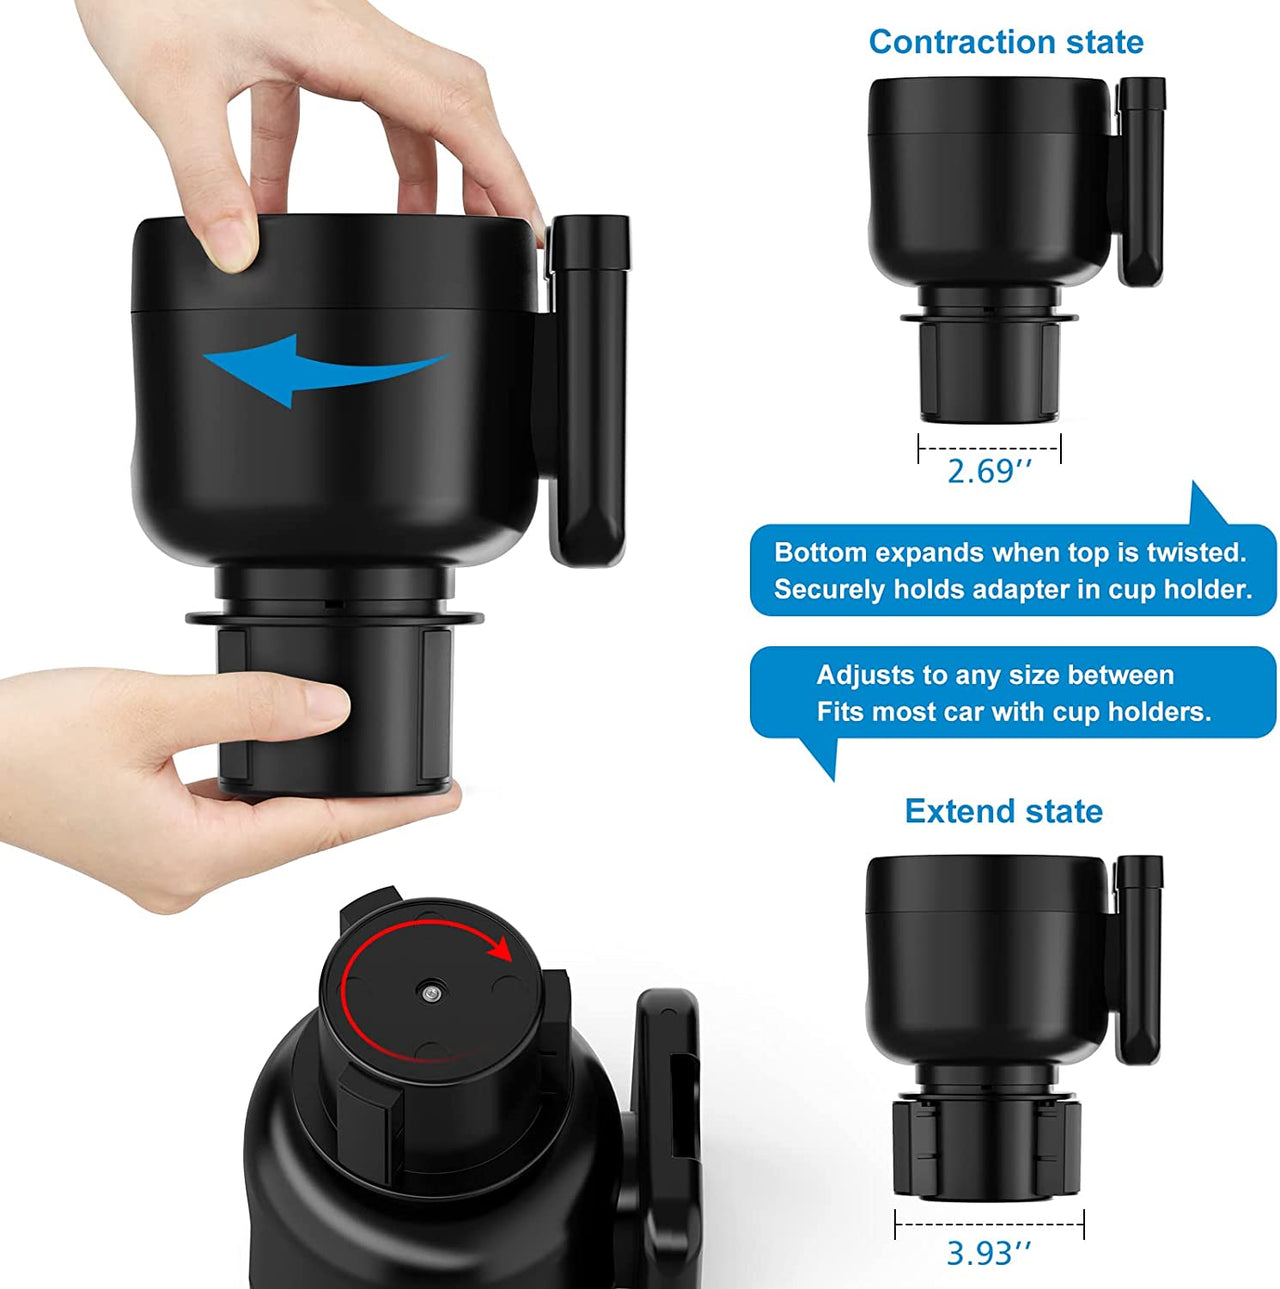 Car Cup Holder 2-in-1, Custom-Fit For Car, Car Cup Holder Expander Adapter with Adjustable Base, Car Cup Holder Expander Organizer with Phone Holder WATY233